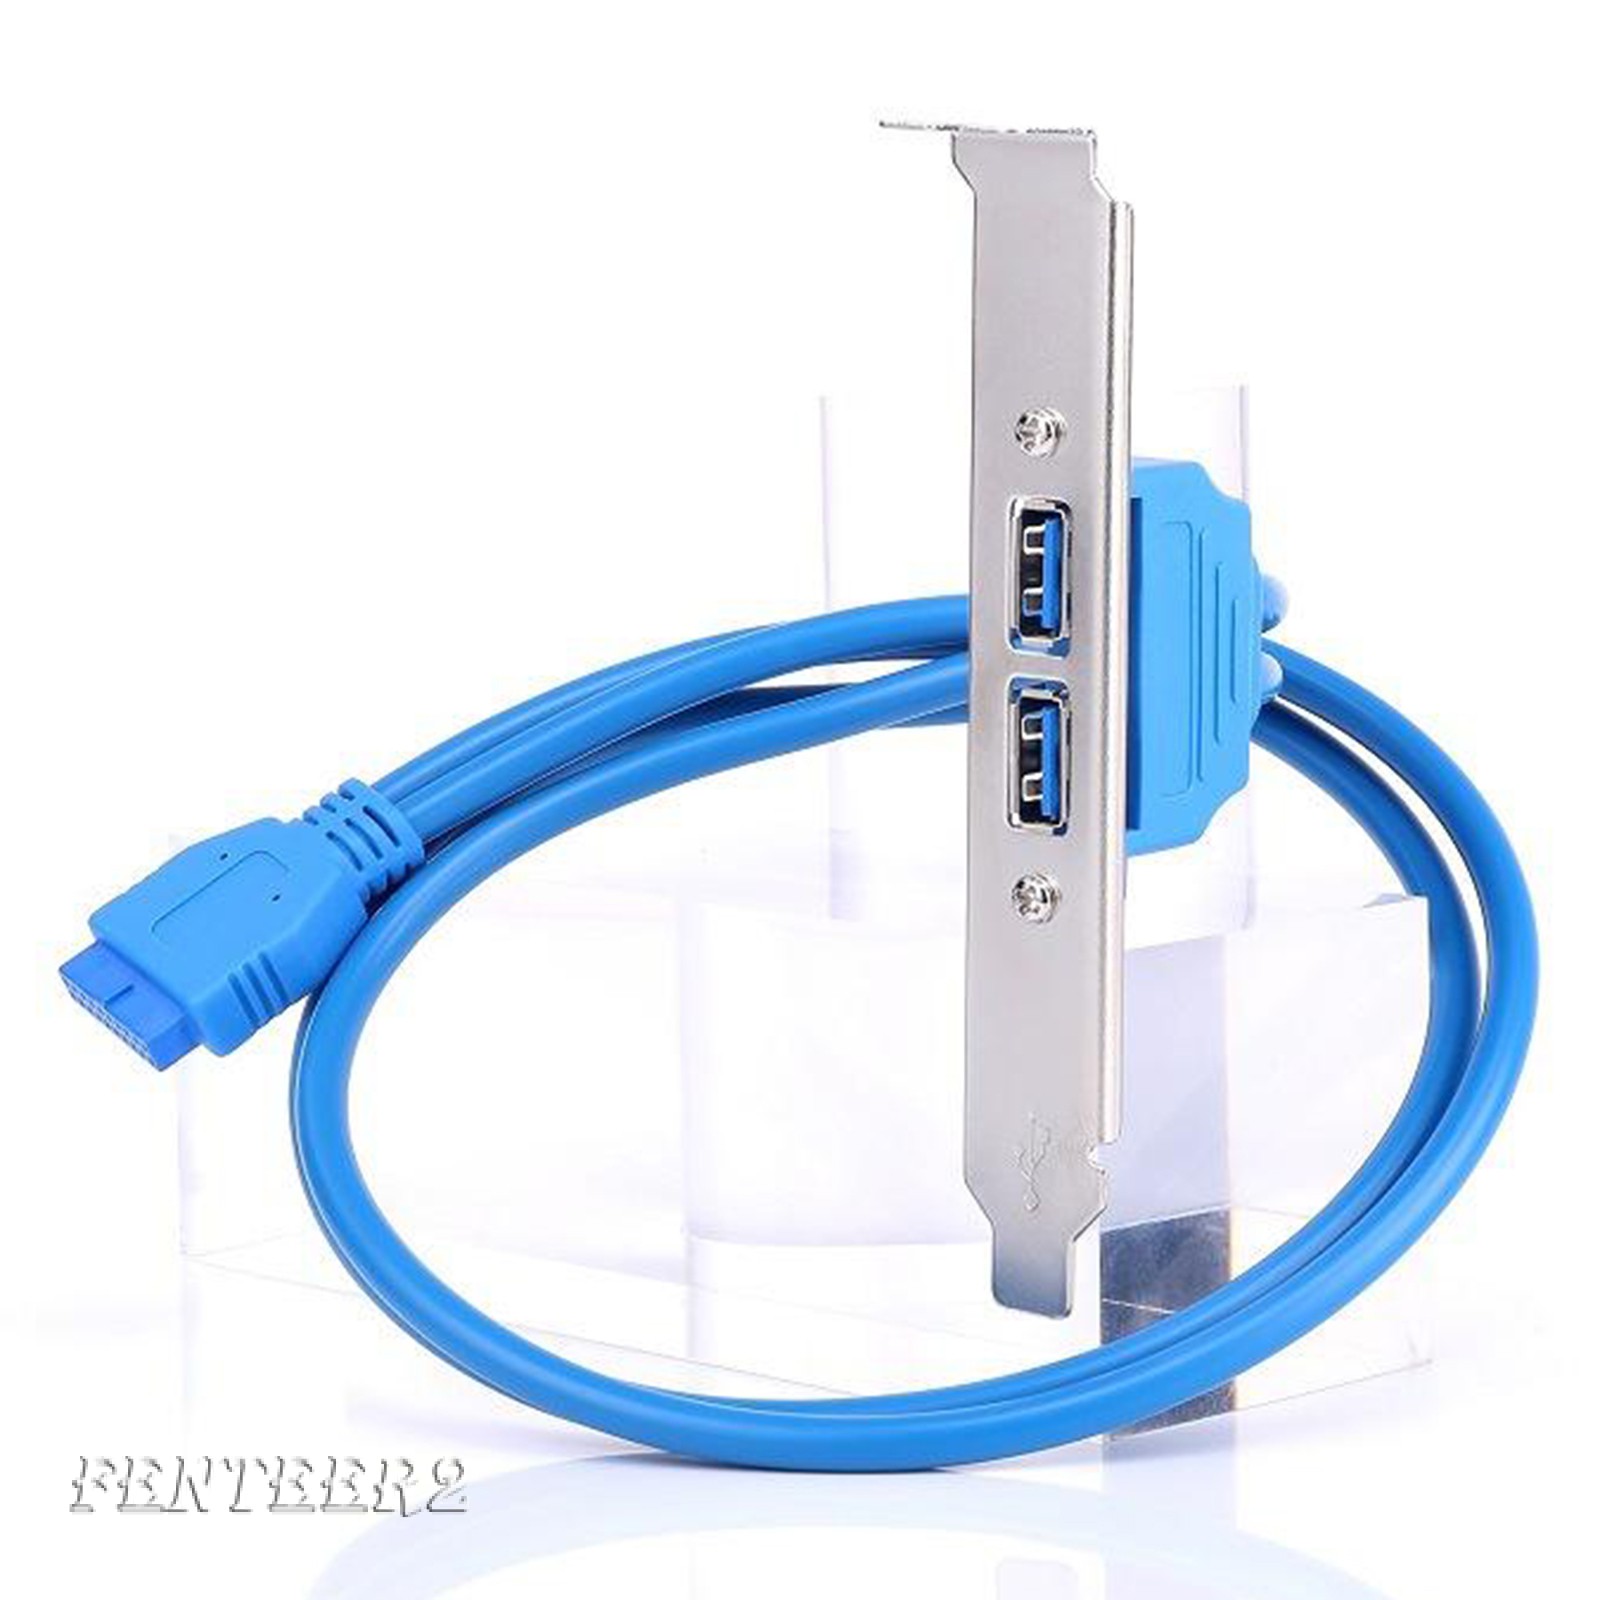 (Fenteer2 3c) Dual 2 Ports Usb 3.0 Back Panel To 20pin Header Cable With Bracket | WebRaoVat - webraovat.net.vn